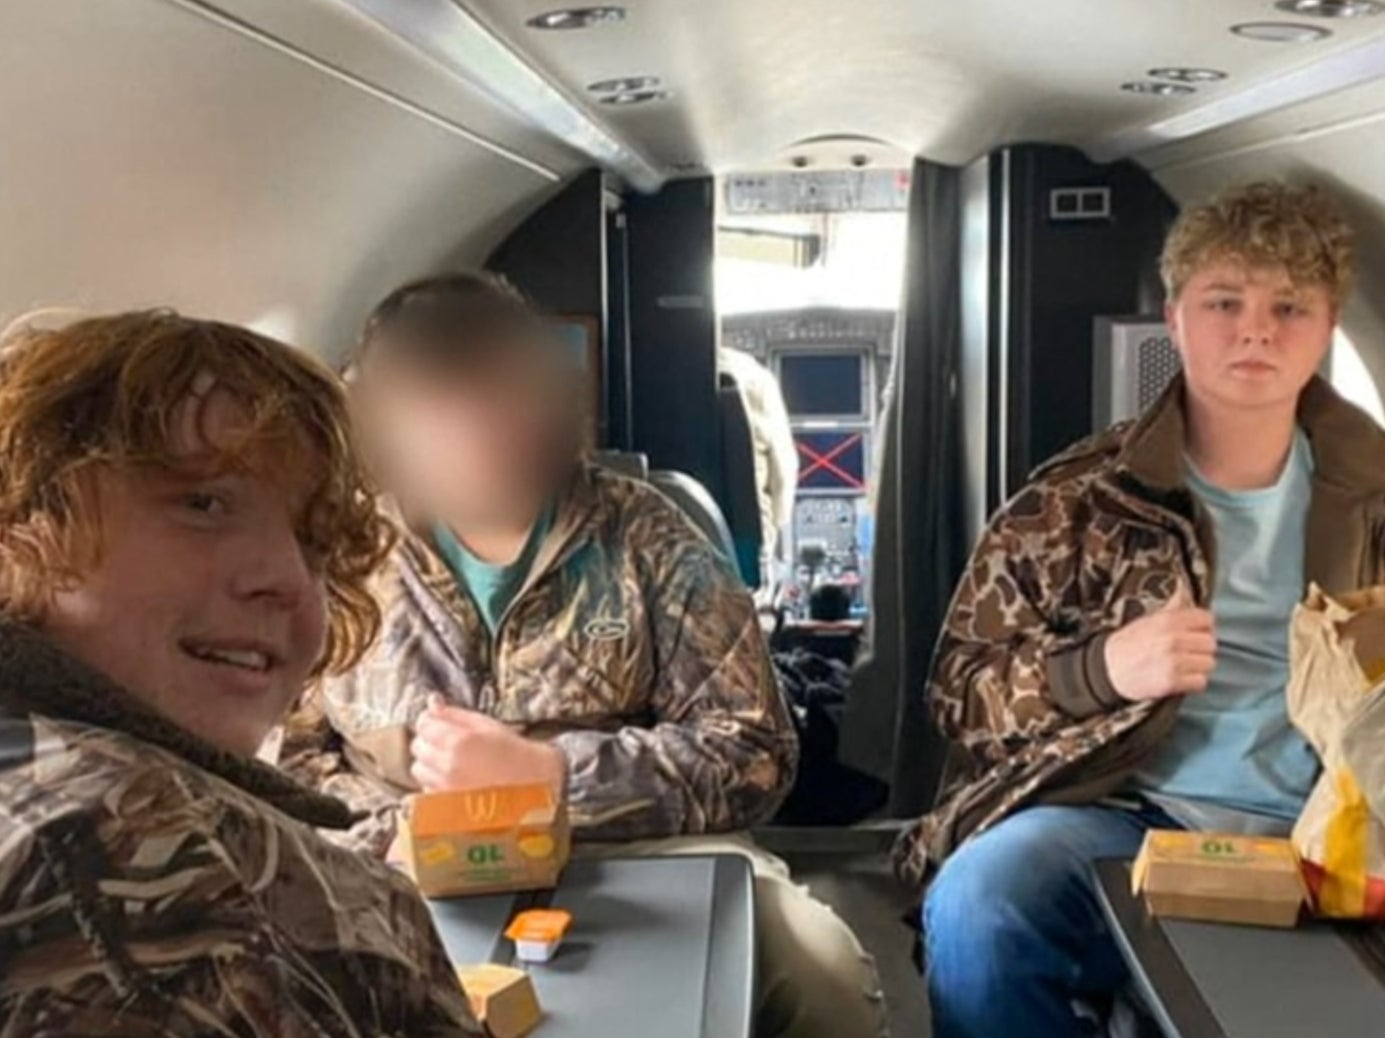 A family member shared this photo of the teens whose plane crashed off the coast of North Carolina on 13 February 2022